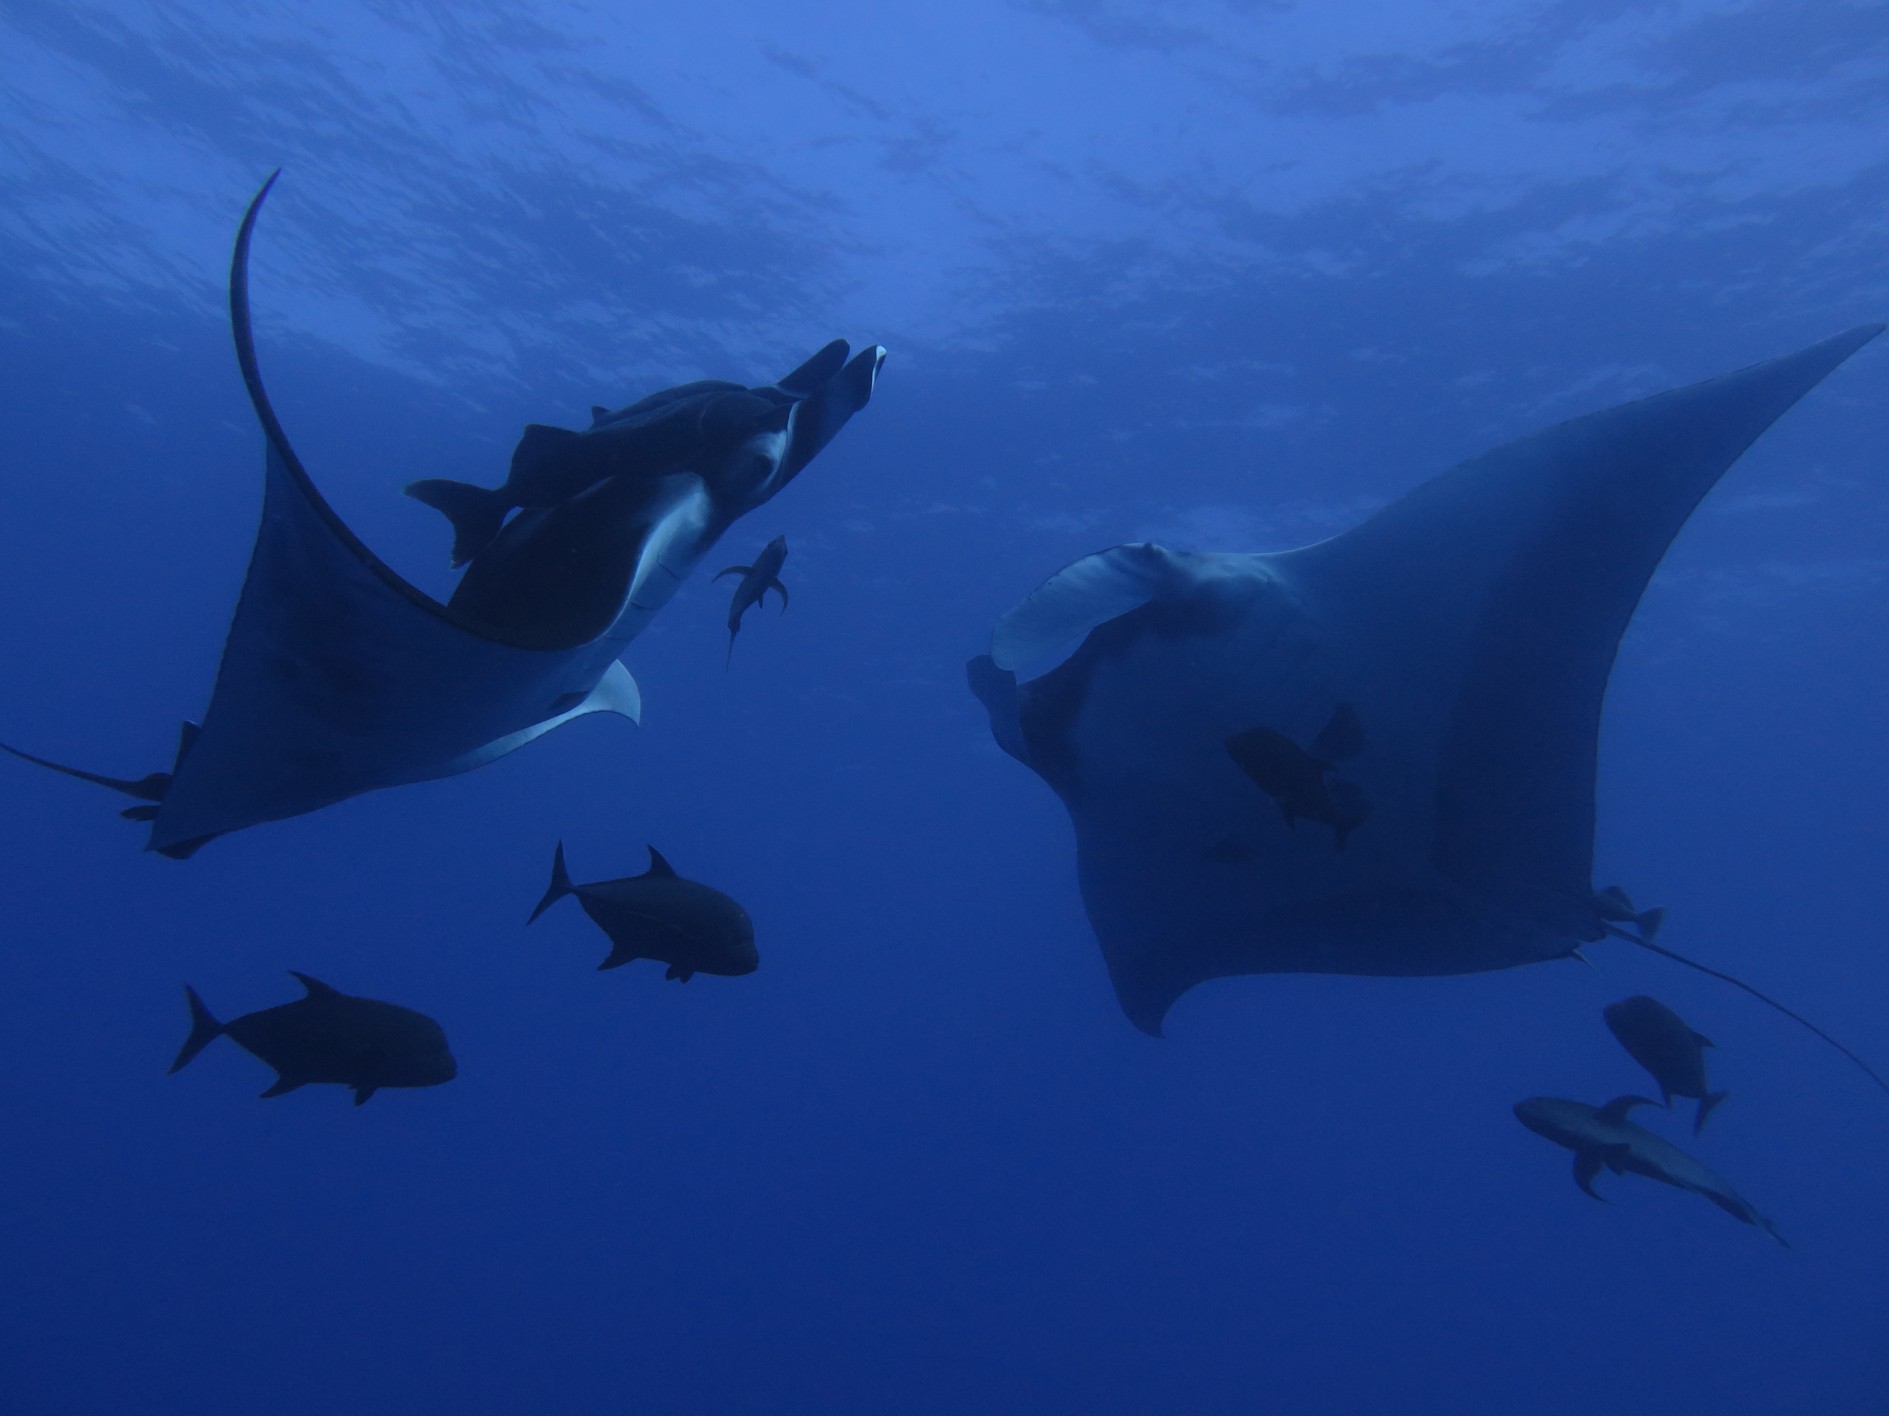 two giant manta rays seemingly doing an aquatic dance together